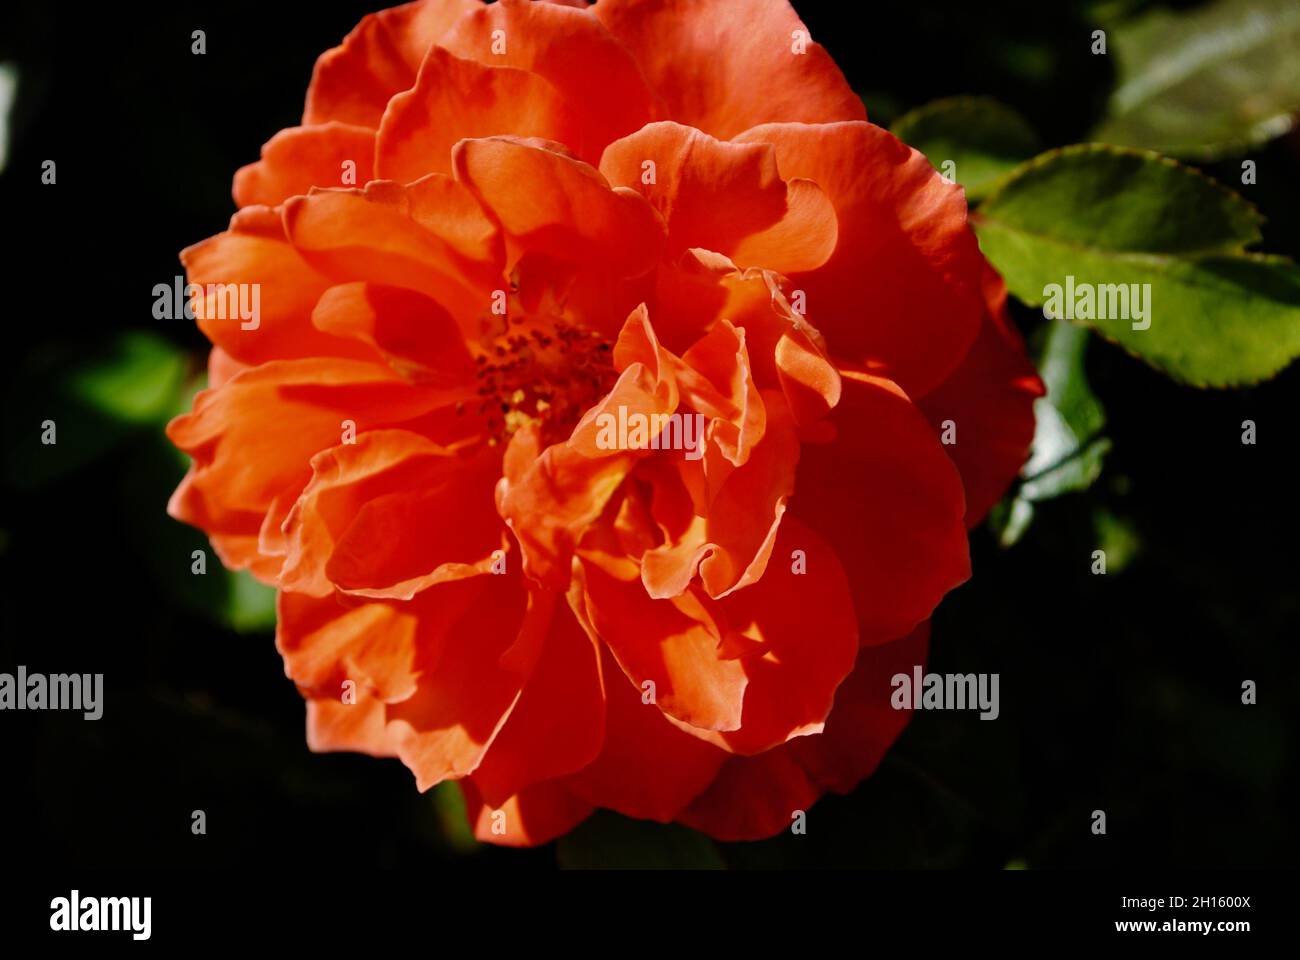 Rose in bloom on roof deck garden in New York City Stock Photo